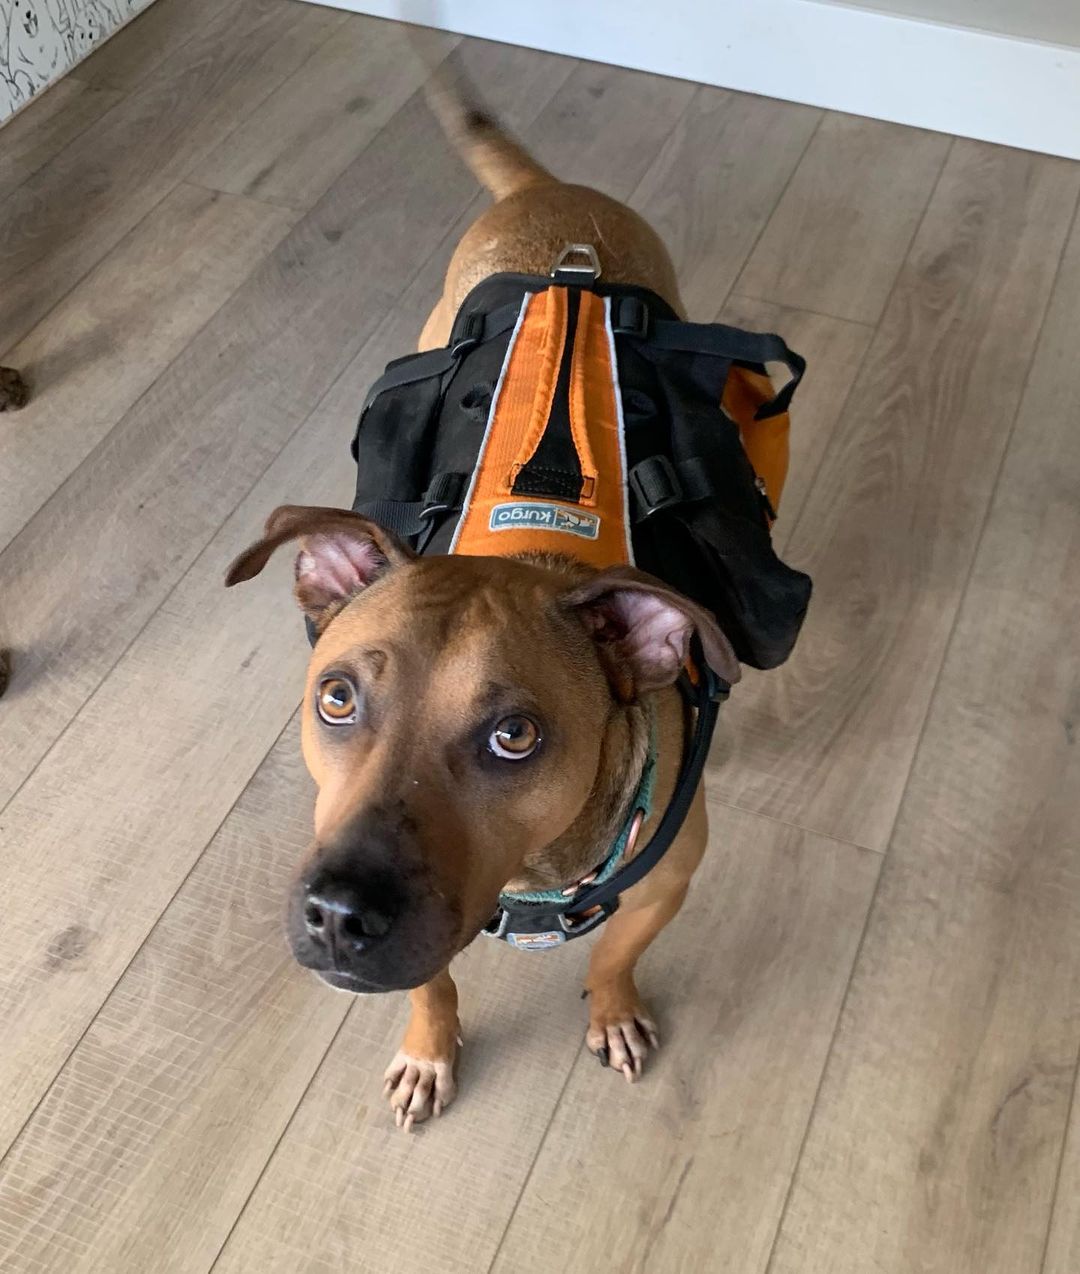 🏔Hiking buddy?! “Yes! I’ll even carry my own gear!” - Frito @kurgo 
Frito is still looking for a adopter!
🏃🏽‍♂️ Active
🧸 affectionate 
⭐️crate trained
⭐️ neutered
🔵 will require a few meet and greets to get comfortable with new people
🔵 no cats

<a target='_blank' href='https://www.instagram.com/explore/tags/AdoptFrito/'>#AdoptFrito</a> <a target='_blank' href='https://www.instagram.com/explore/tags/cartoondog/'>#cartoondog</a> <a target='_blank' href='https://www.instagram.com/explore/tags/Fritochip/'>#Fritochip</a> <a target='_blank' href='https://www.instagram.com/explore/tags/pnwdog/'>#pnwdog</a> <a target='_blank' href='https://www.instagram.com/explore/tags/sharpeimix/'>#sharpeimix</a> <a target='_blank' href='https://www.instagram.com/explore/tags/readyforfall/'>#readyforfall</a> <a target='_blank' href='https://www.instagram.com/explore/tags/backpackdog/'>#backpackdog</a> <a target='_blank' href='https://www.instagram.com/explore/tags/letsgo/'>#letsgo</a> <a target='_blank' href='https://www.instagram.com/explore/tags/campingdog/'>#campingdog</a>